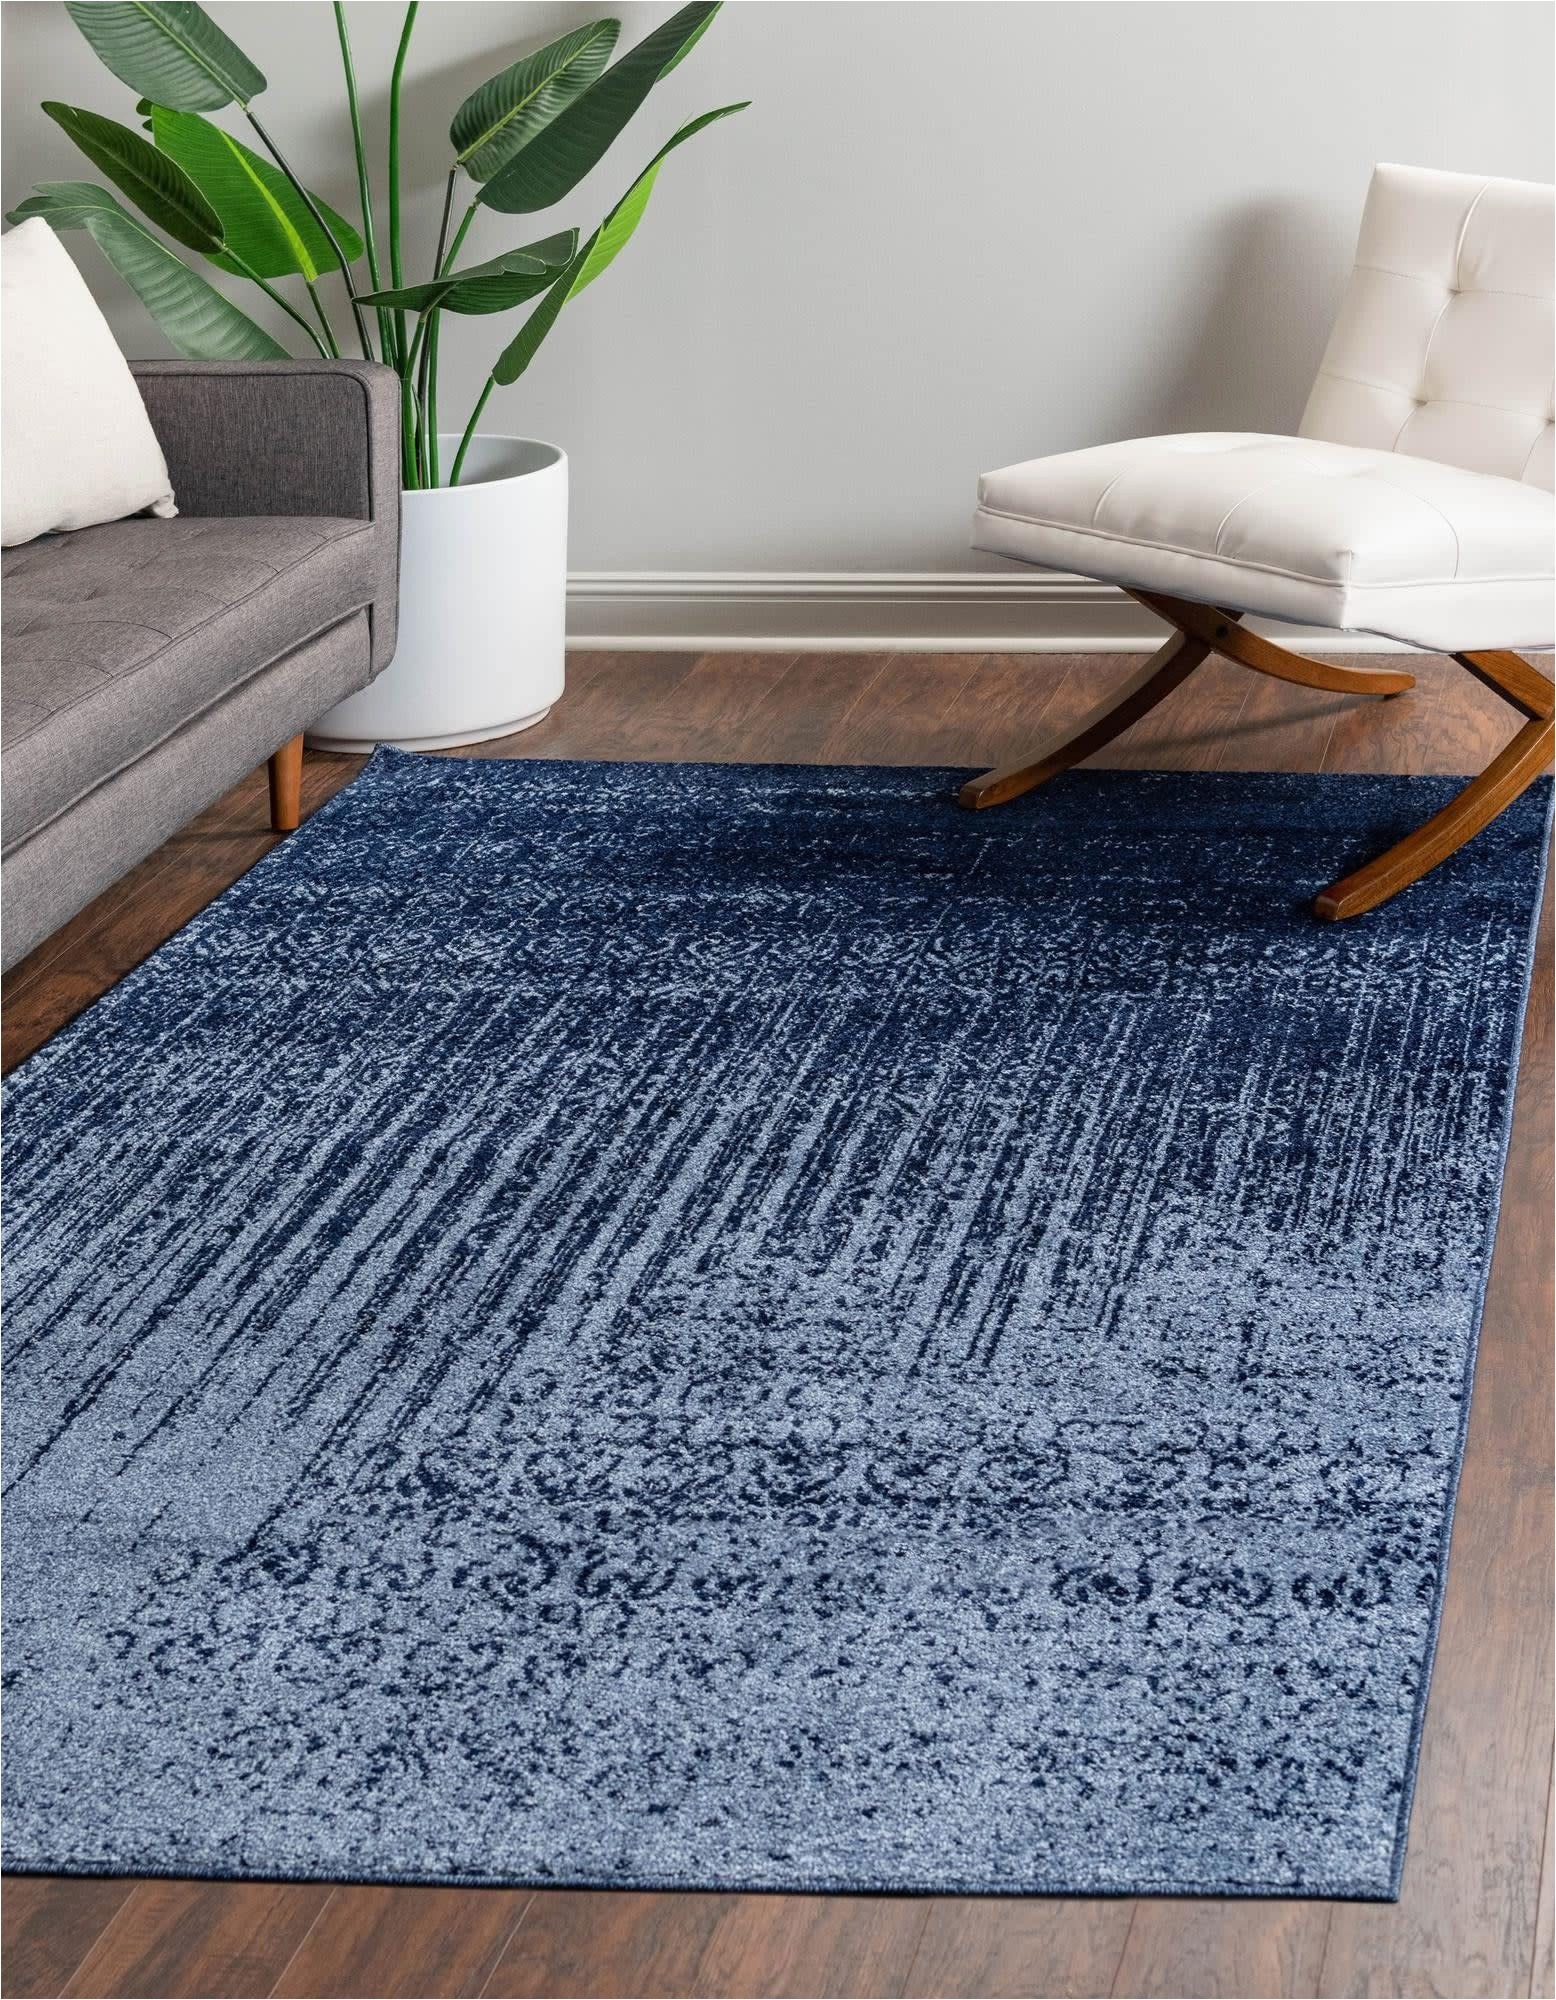 13 X 14 area Rugs Unique Loom Del Mar Collection area Rug-transitional Inspired with Modern Contemporary Design, Rectangular 10′ 0″ X 14′ 0″, Blue/navy Blue